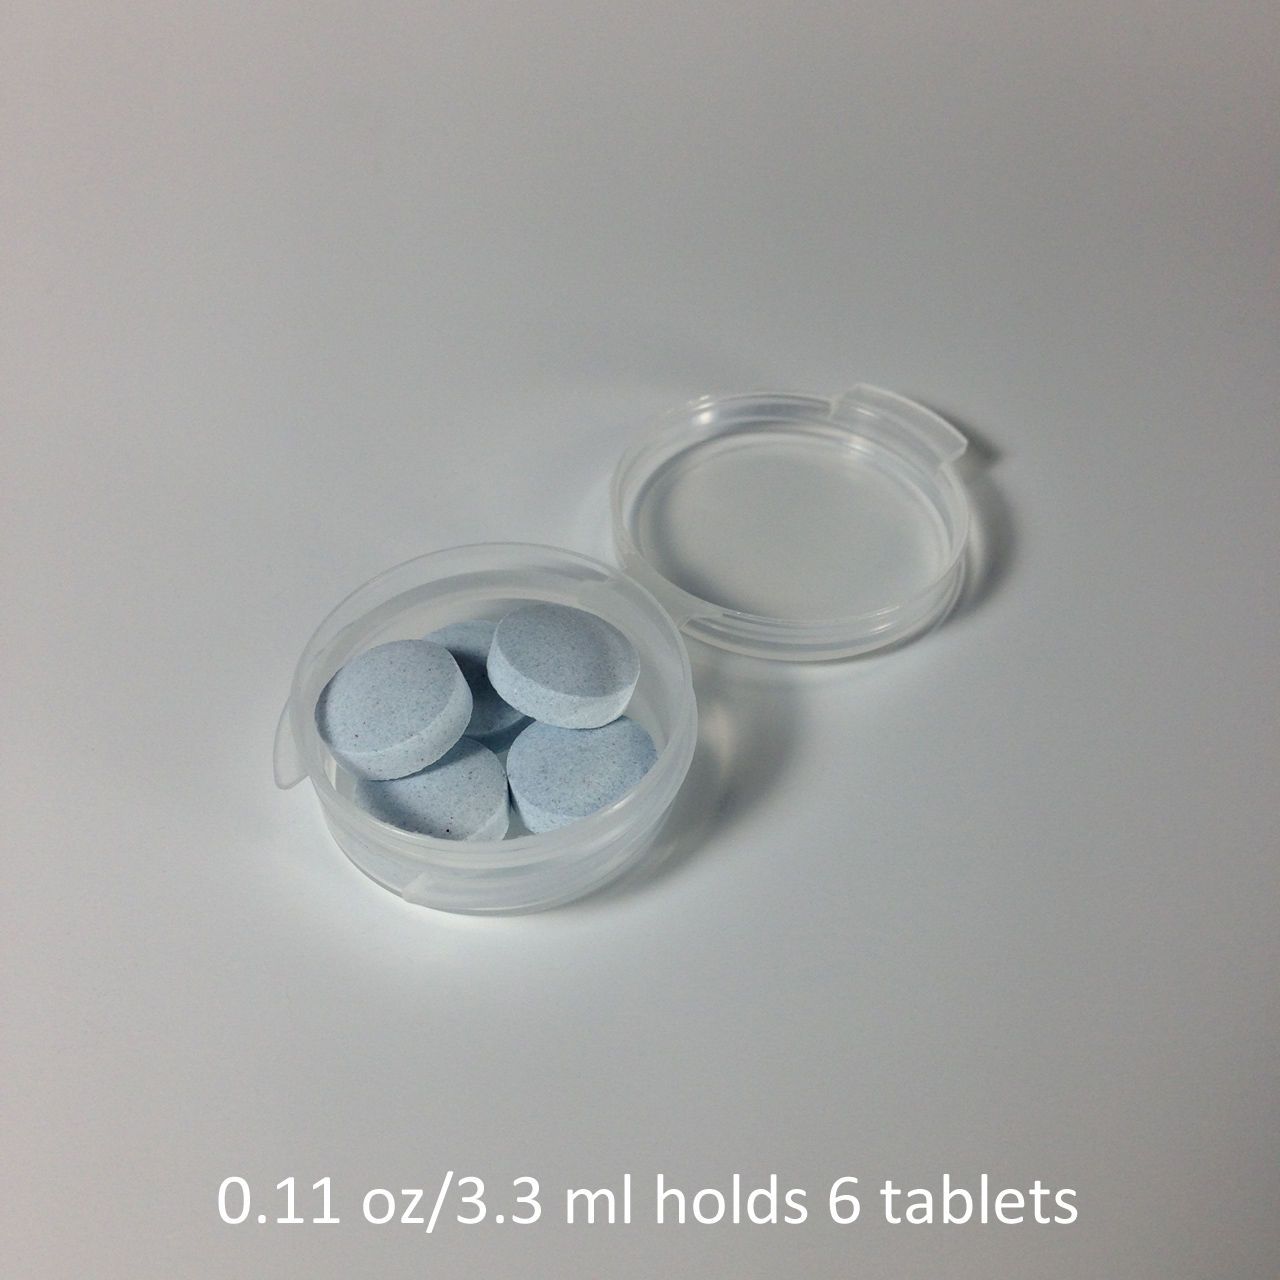 hinge-top-container-3.3ml-with-tablets.jpg